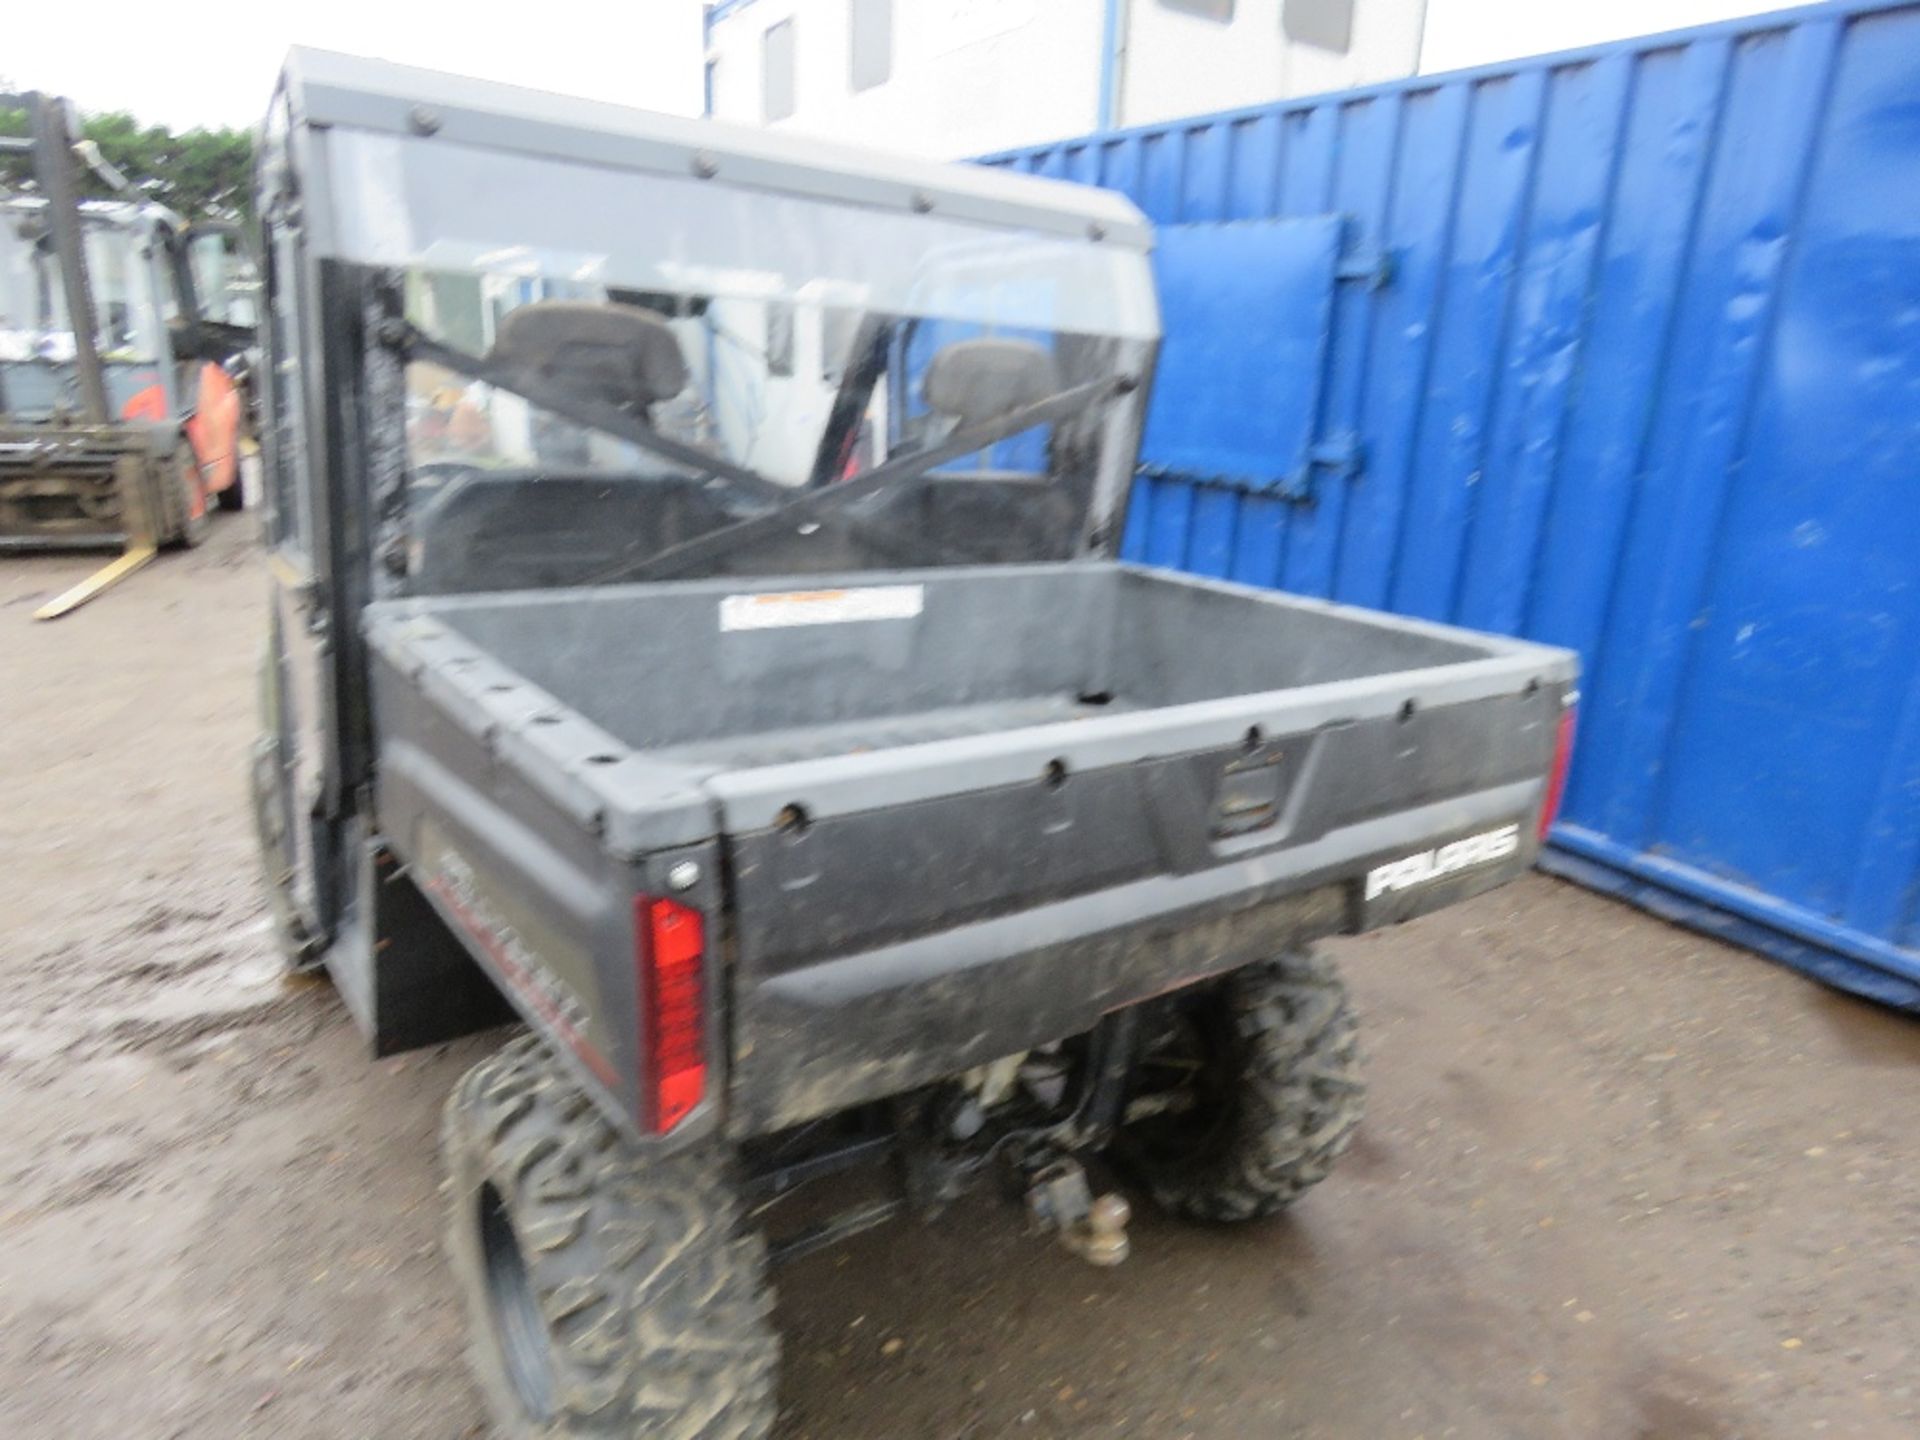 POLARIS 900D CABBED RANGER DIESEL ENGINED ROUGH TERRAIN OFF ROAD BUGGY UTILITY VEHICLE 1363 REC HOUR - Image 7 of 9